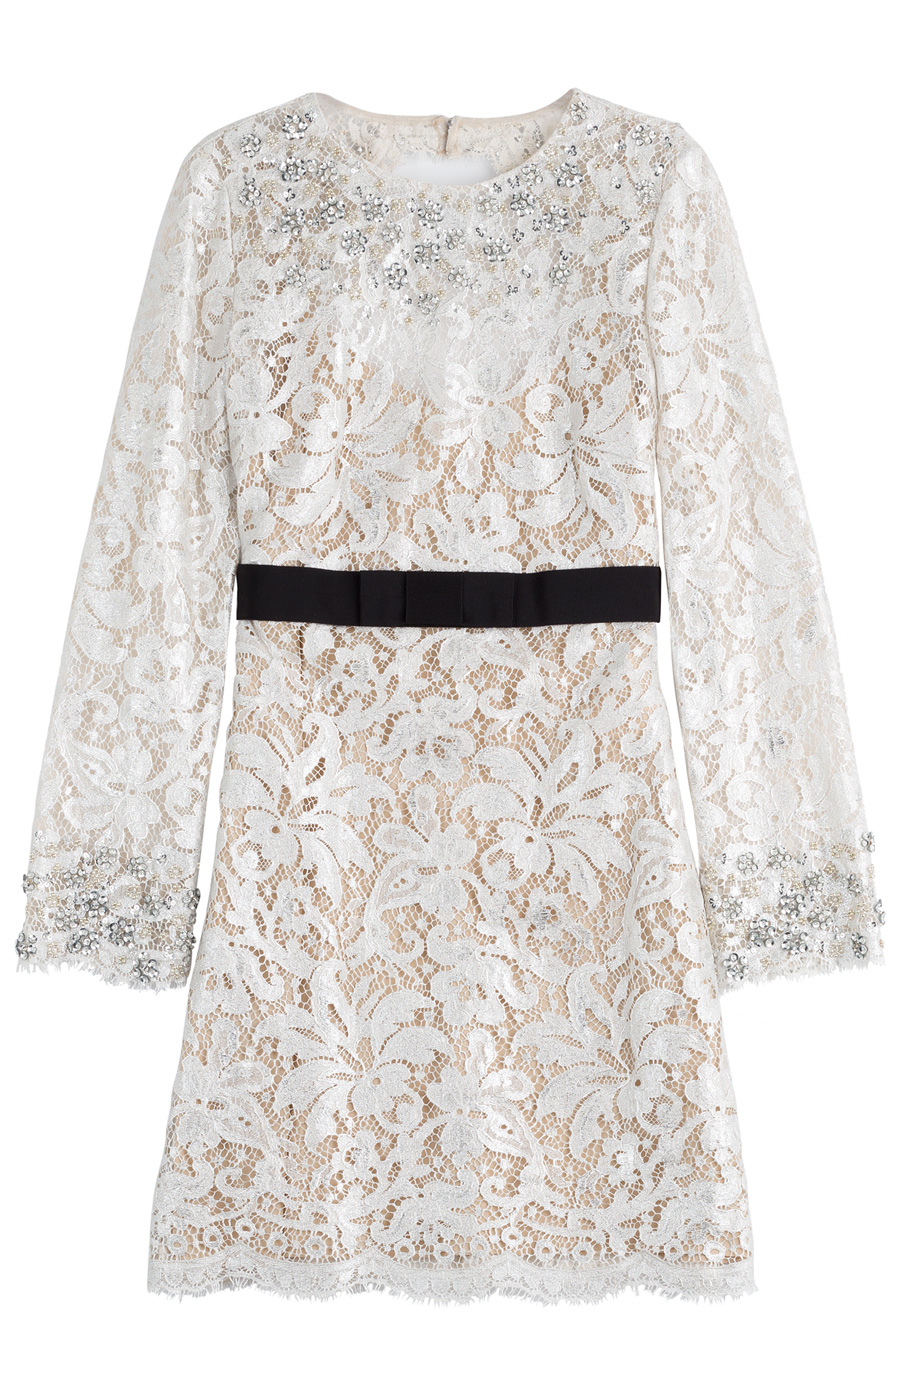 Emilio Pucci Embellished Lace Dress In Beige | ModeSens